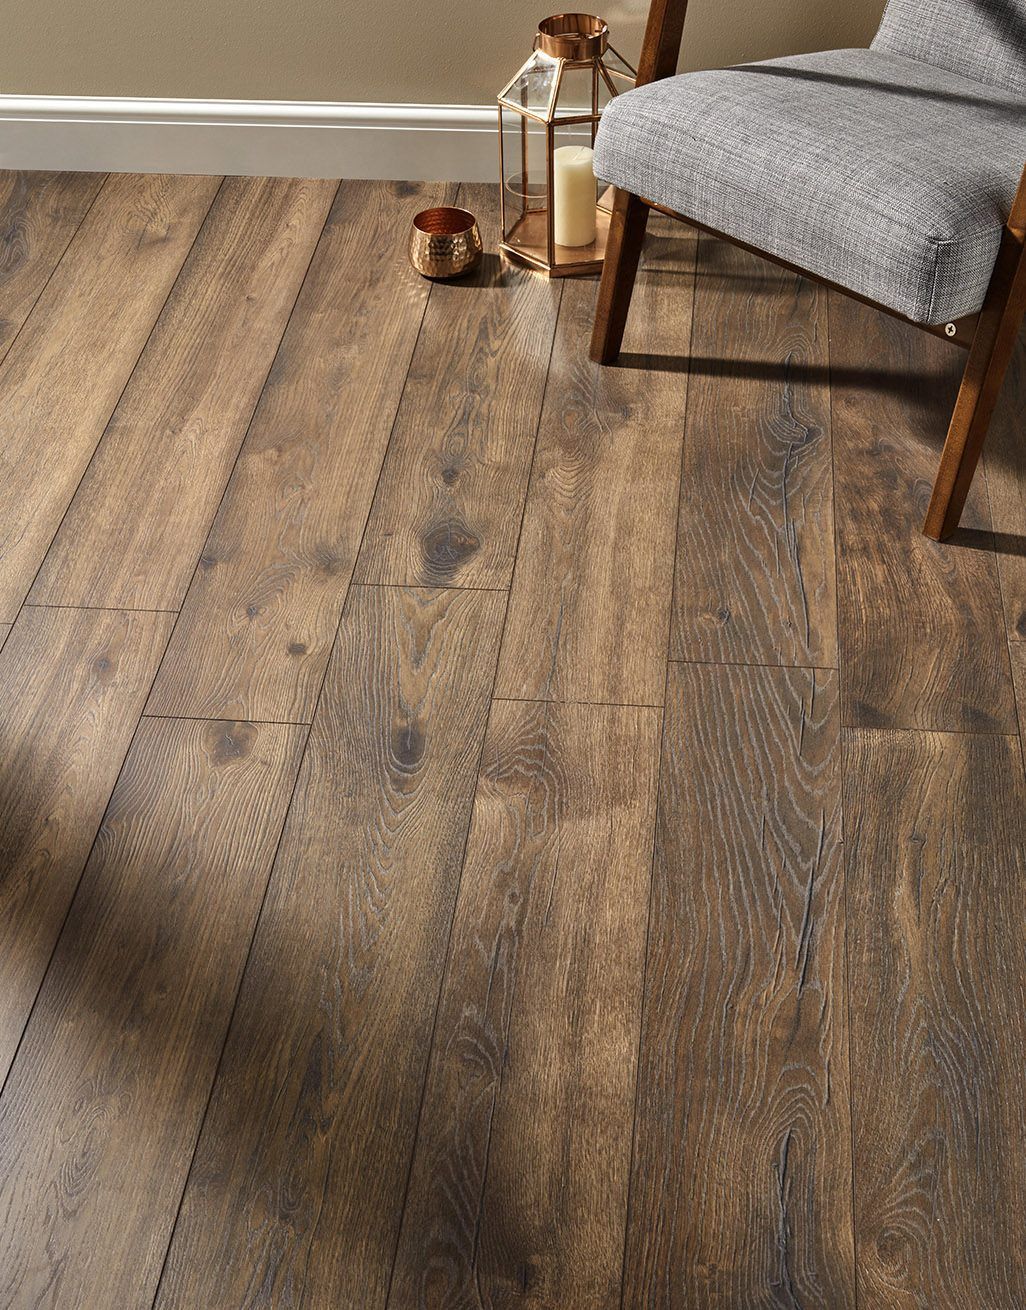 Is laminate flooring singapore right for
you?